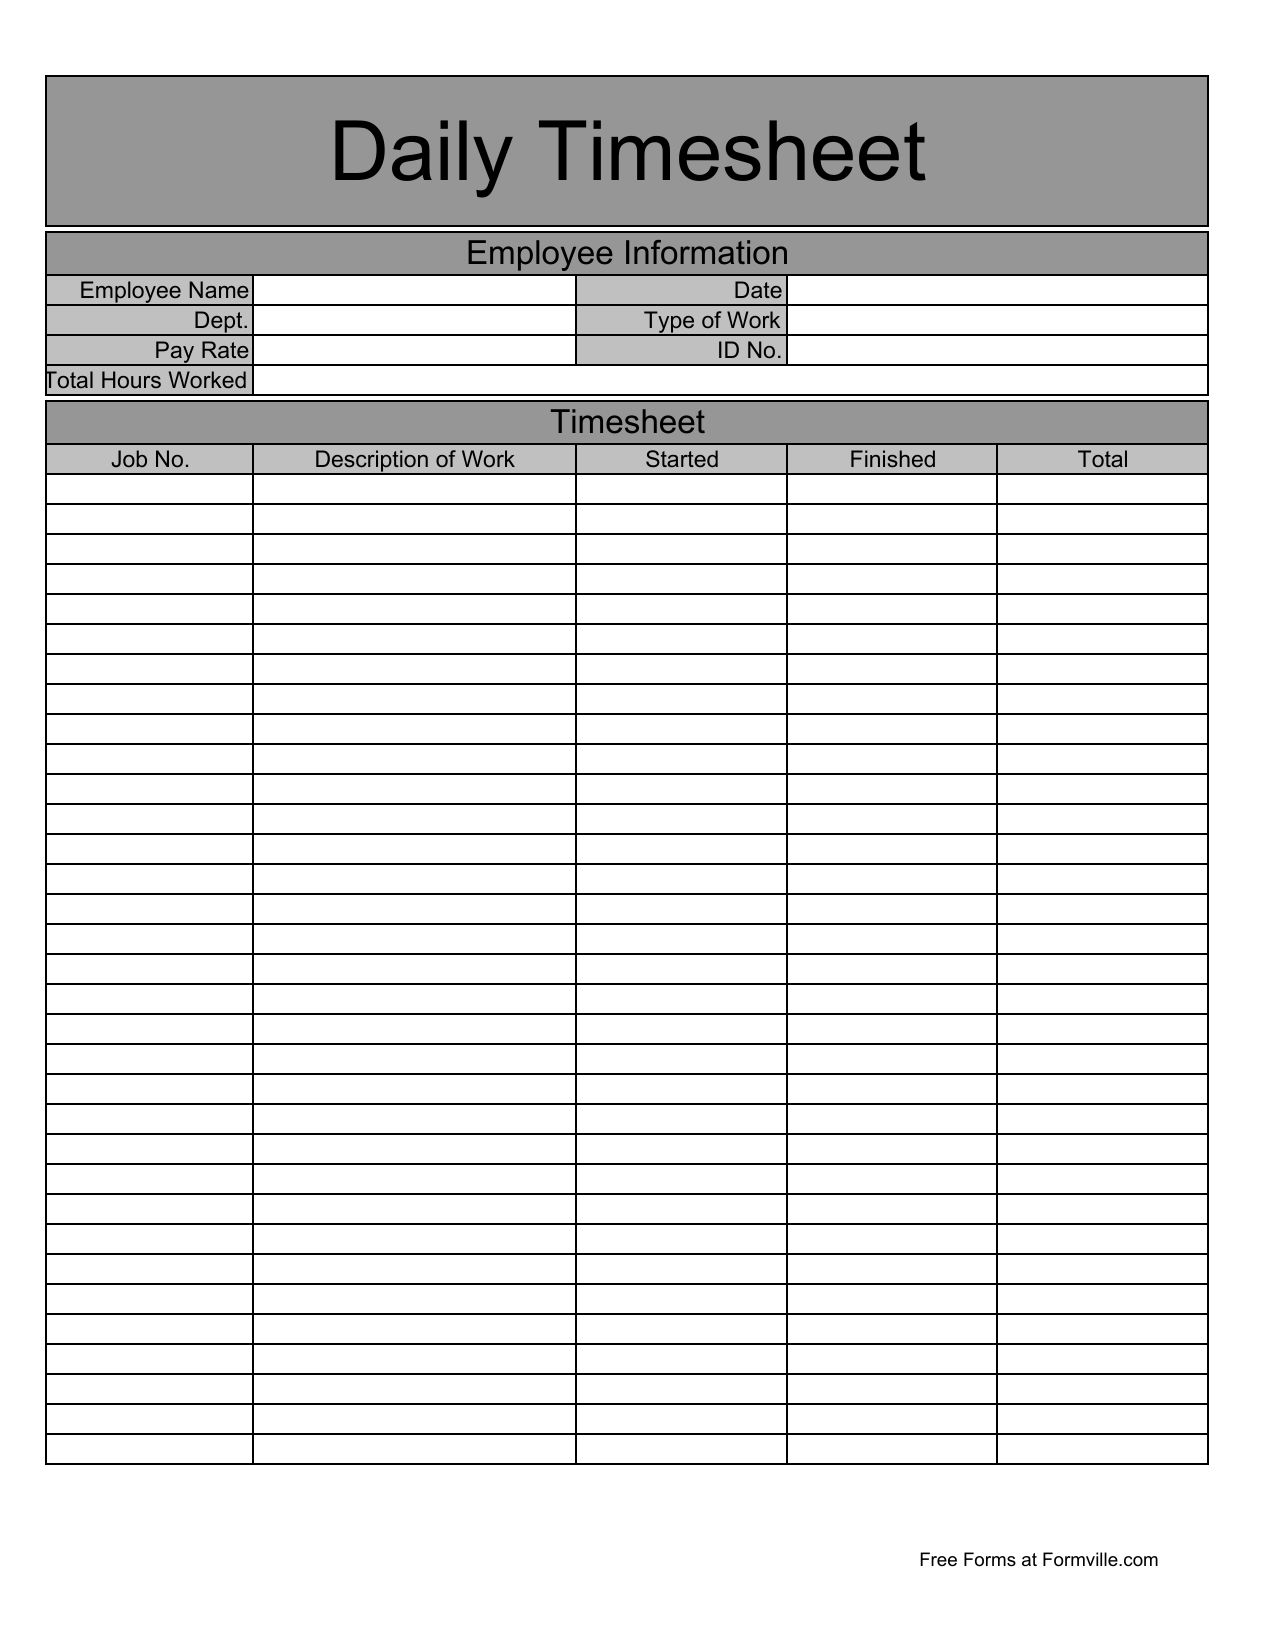 download-daily-timesheet-template-excel-pdf-rtf-word